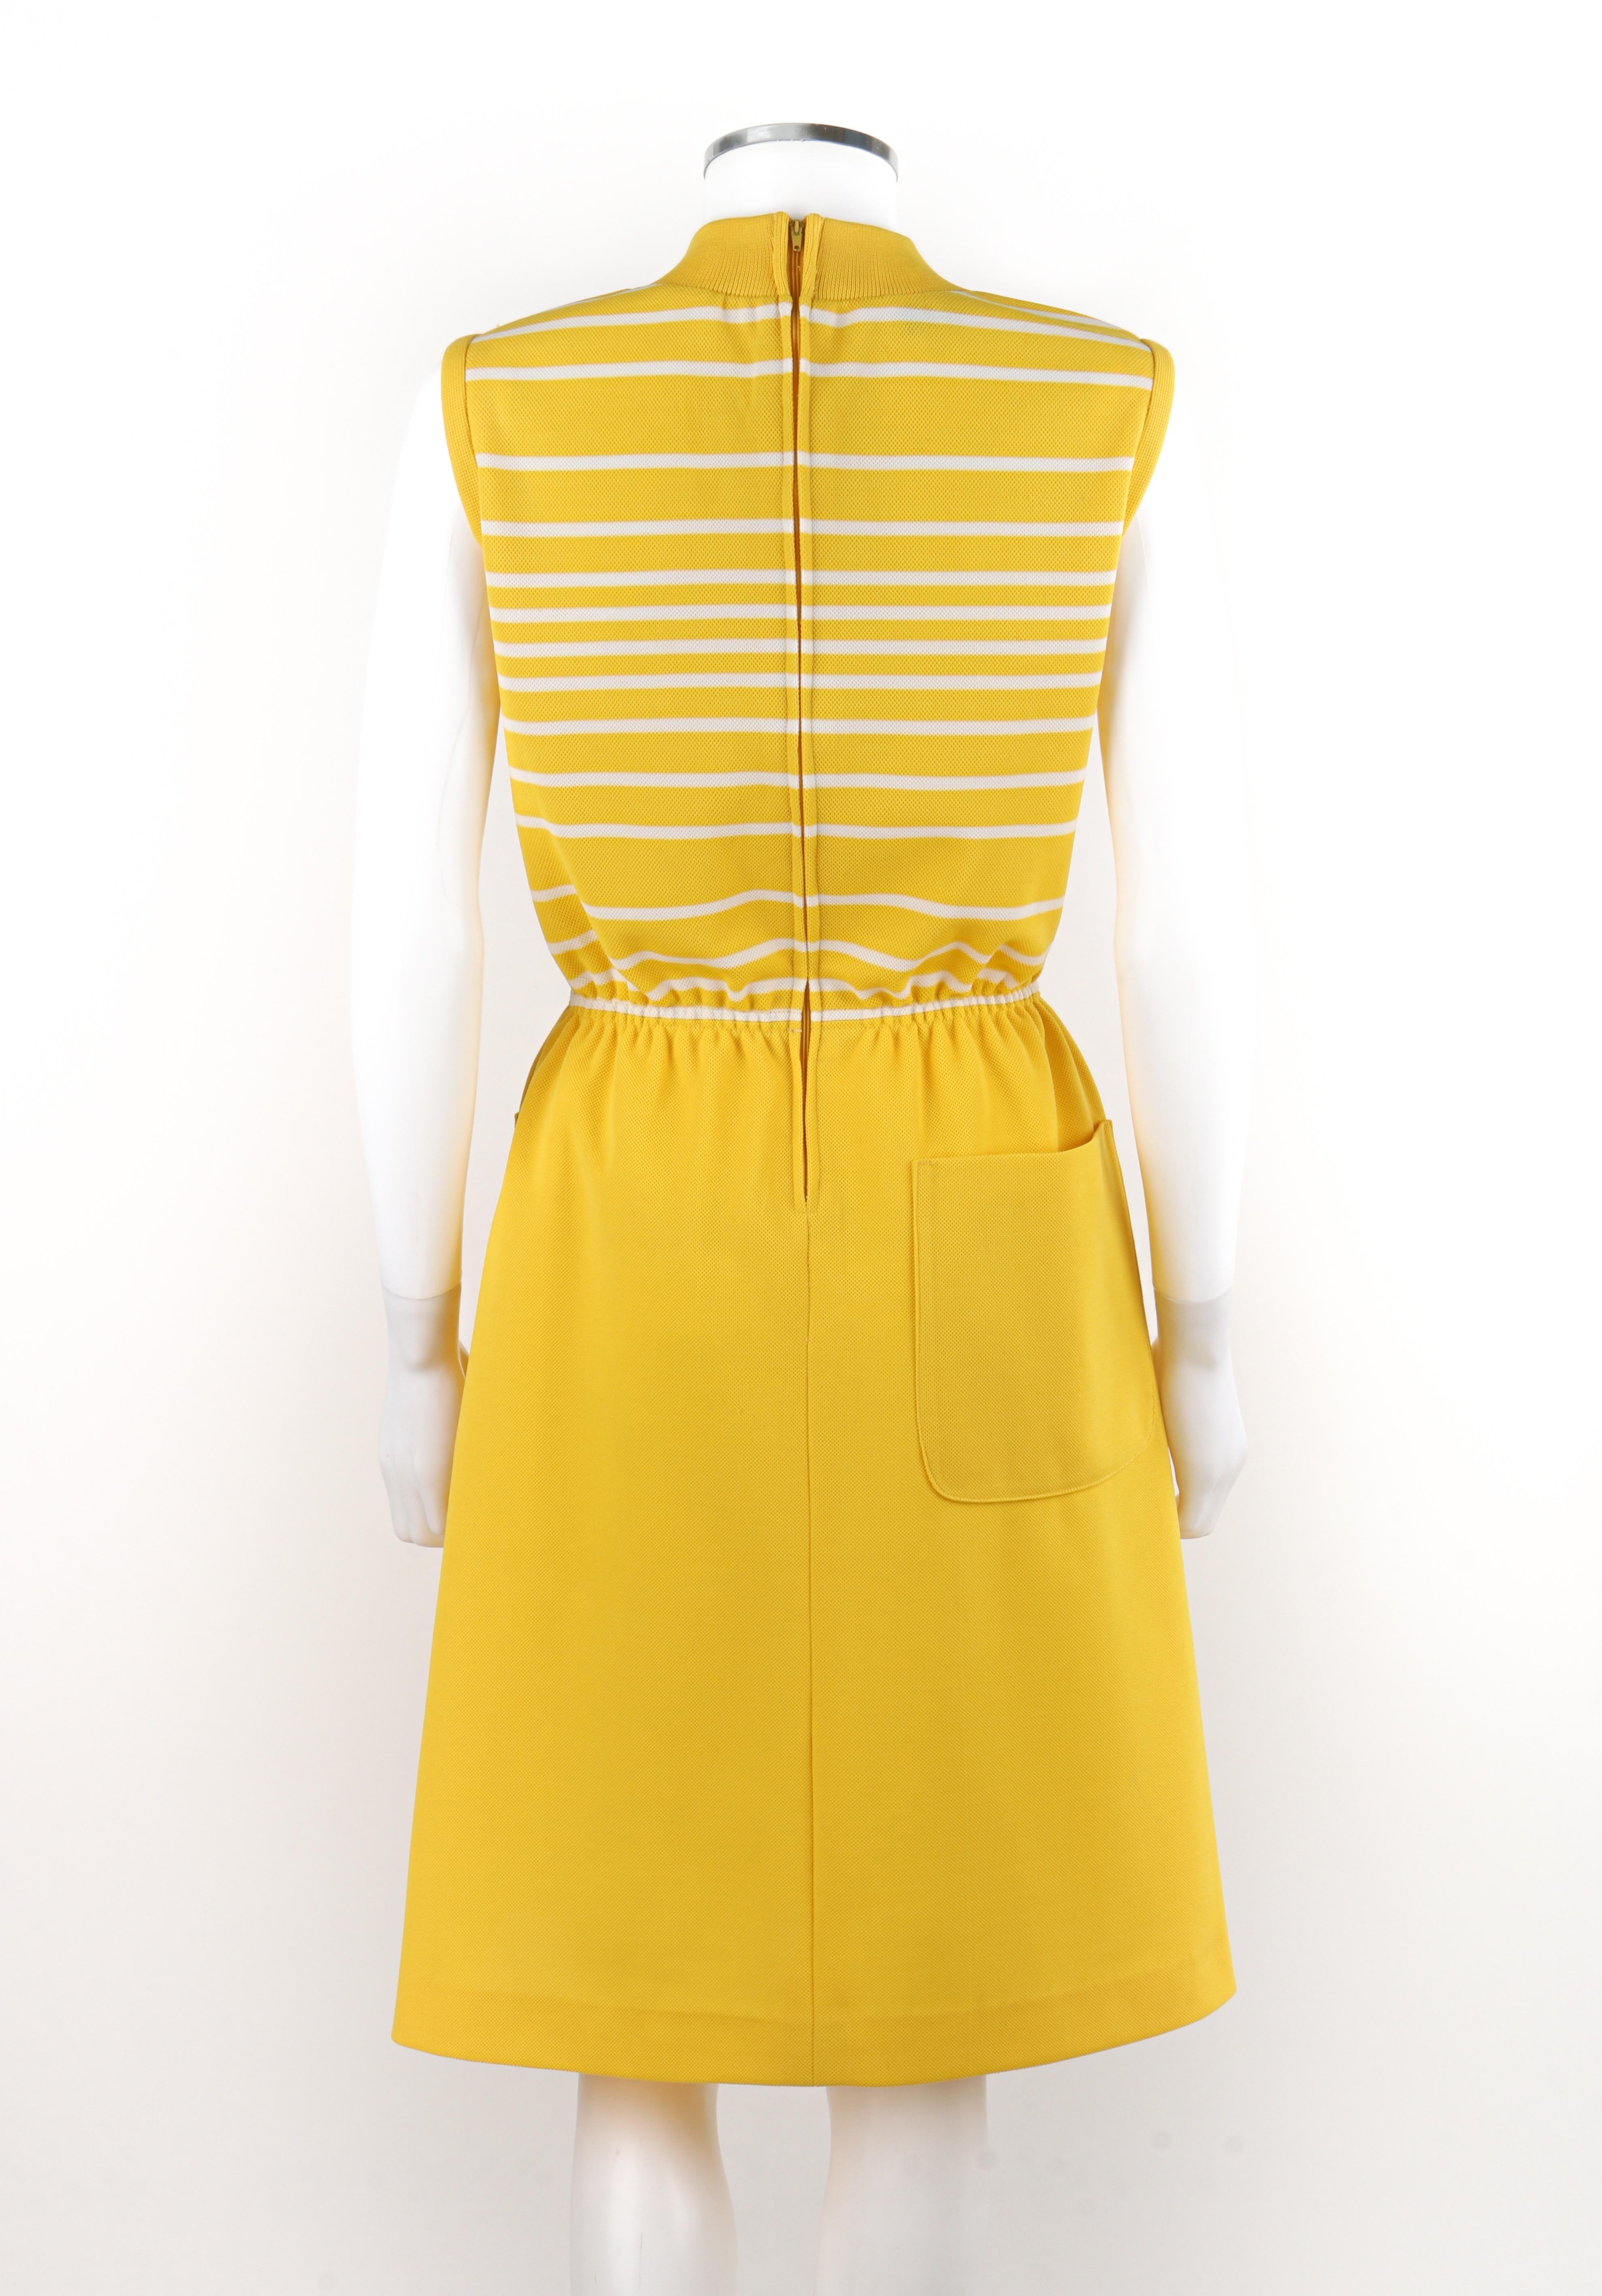 DAVID CRYSTAL LACOSTE c.1960's Yellow White Striped Knee Length Polo Sport Dress In Good Condition For Sale In Thiensville, WI